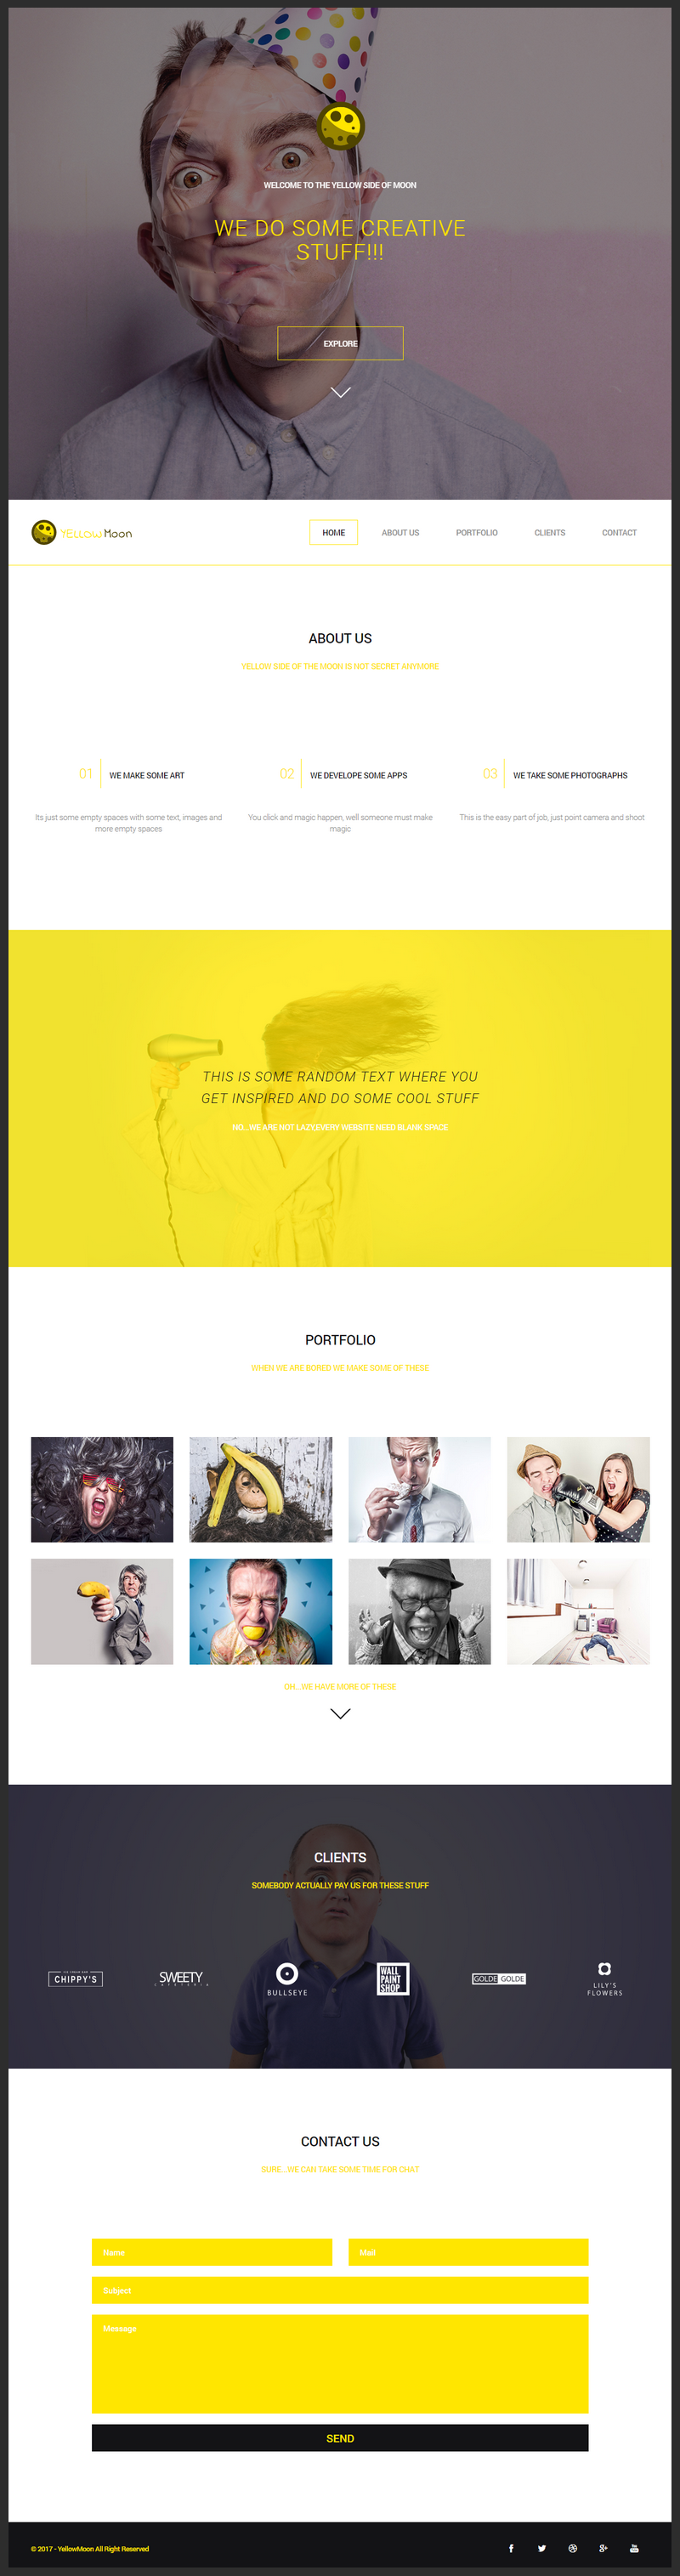 Free HTML Landing Page Template | Bypeople